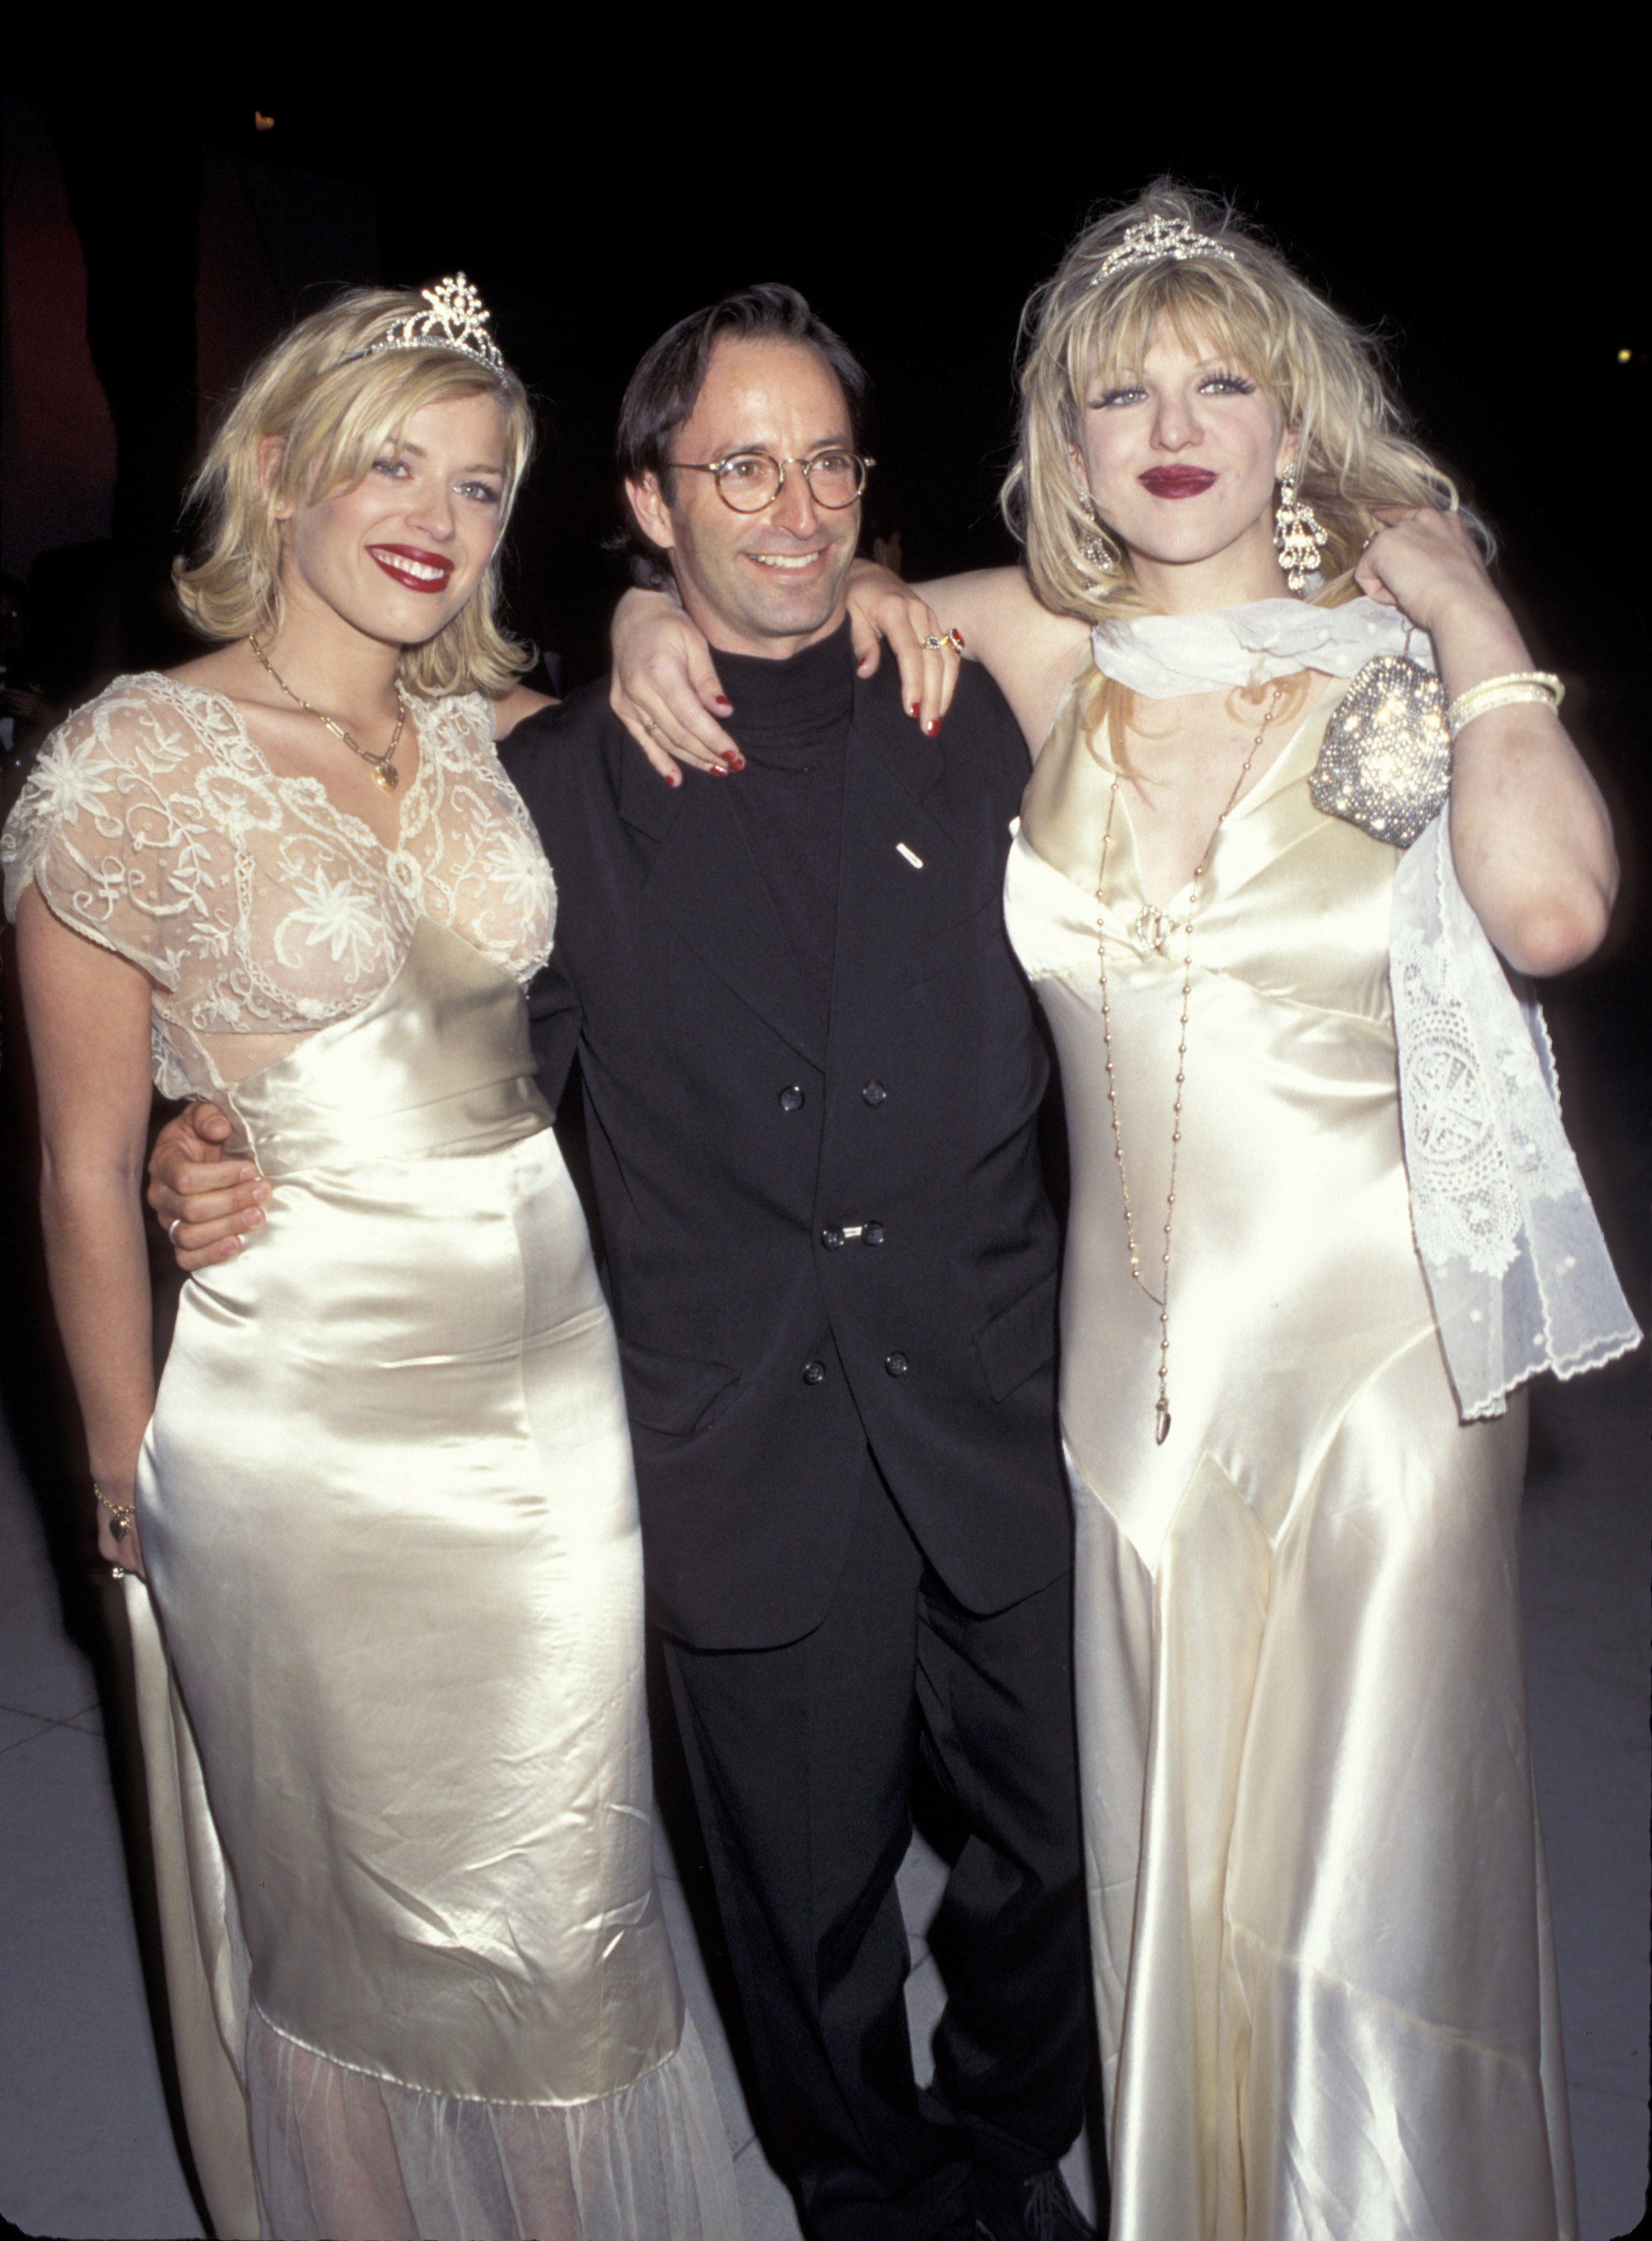 Amanda Decadent, Herb Ritts and Courtney Love during 1995 Vanity Fair Oscar Party - Arrivals at Morton's Restaurant in West Hollywood, California, United States.